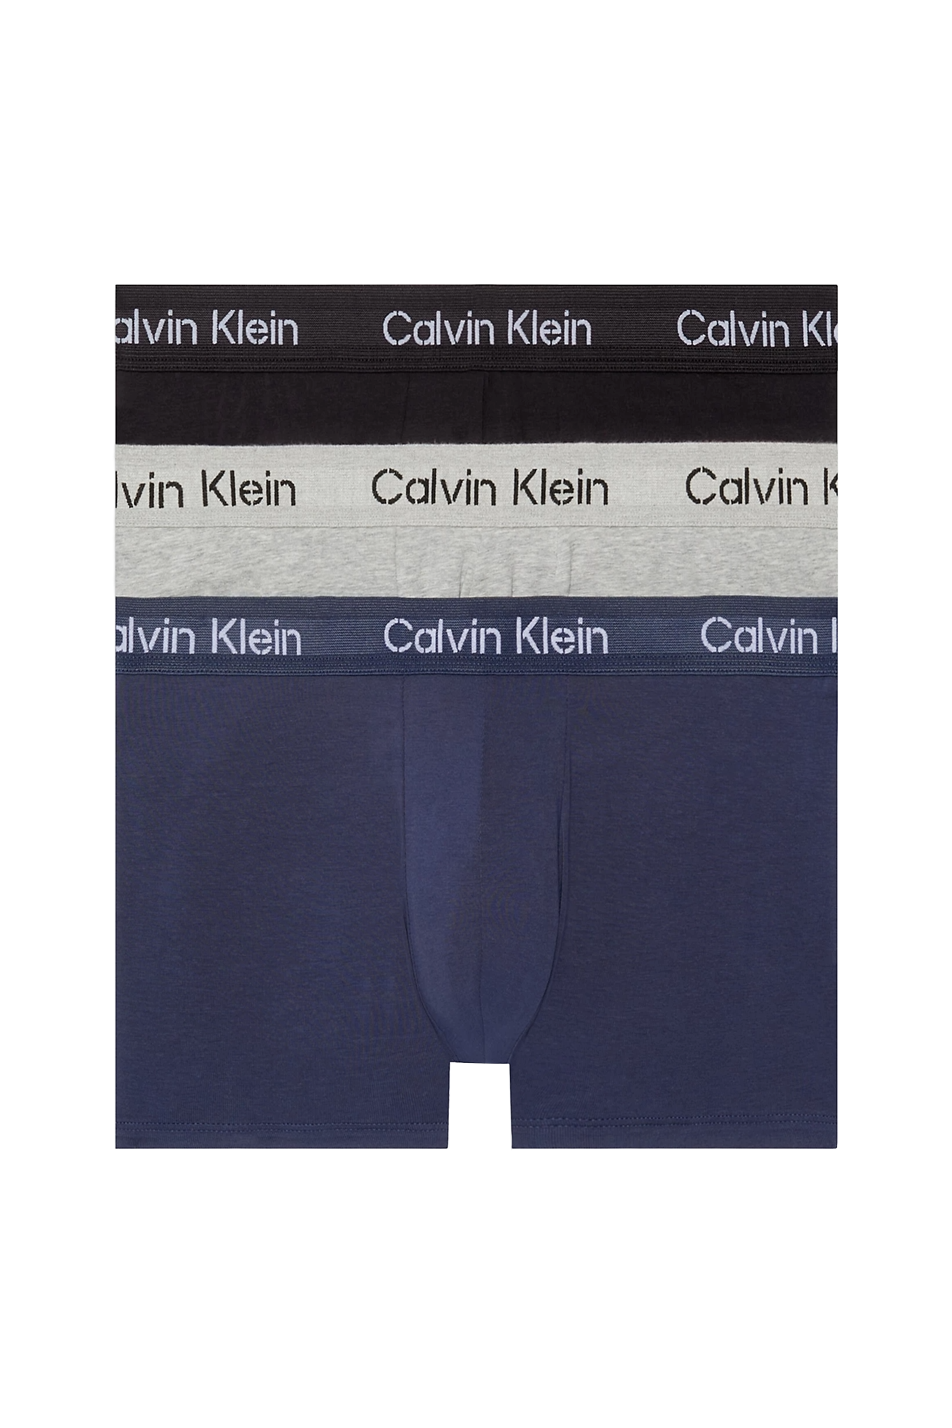 Calvin Klein 3 Pack Men's Recycled Cotton Stretch Trunk